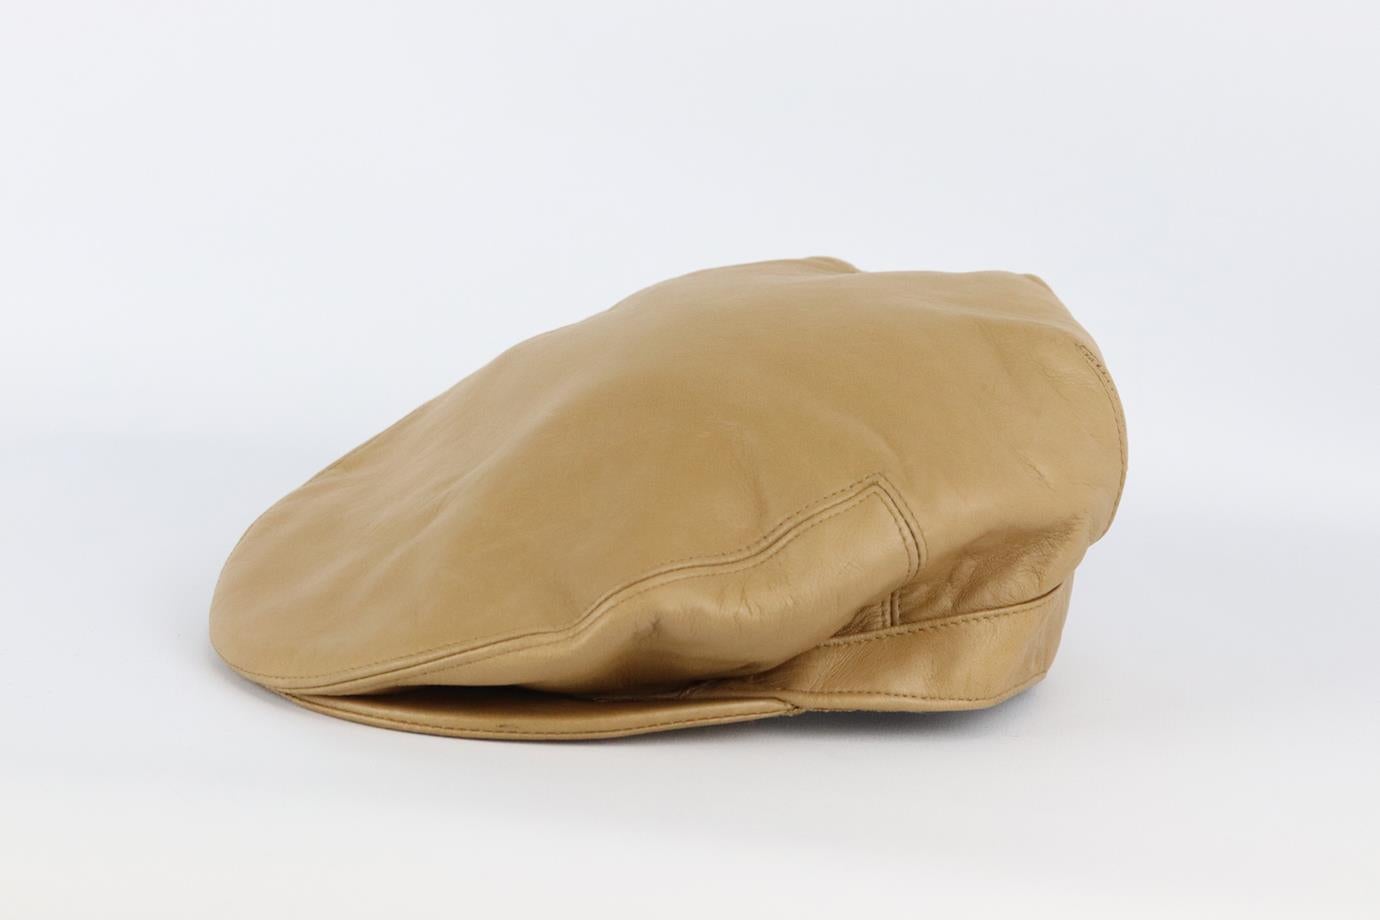 Gucci vintage leather cap. Beige. Pull on. 100% Leather; lining: 100% nylon. Does not come with dustbag or box. Size: Medium. Circumference: 23.6 in. Brim Width: 2.25 in. Good condition - Light signs of wear; see pictures.